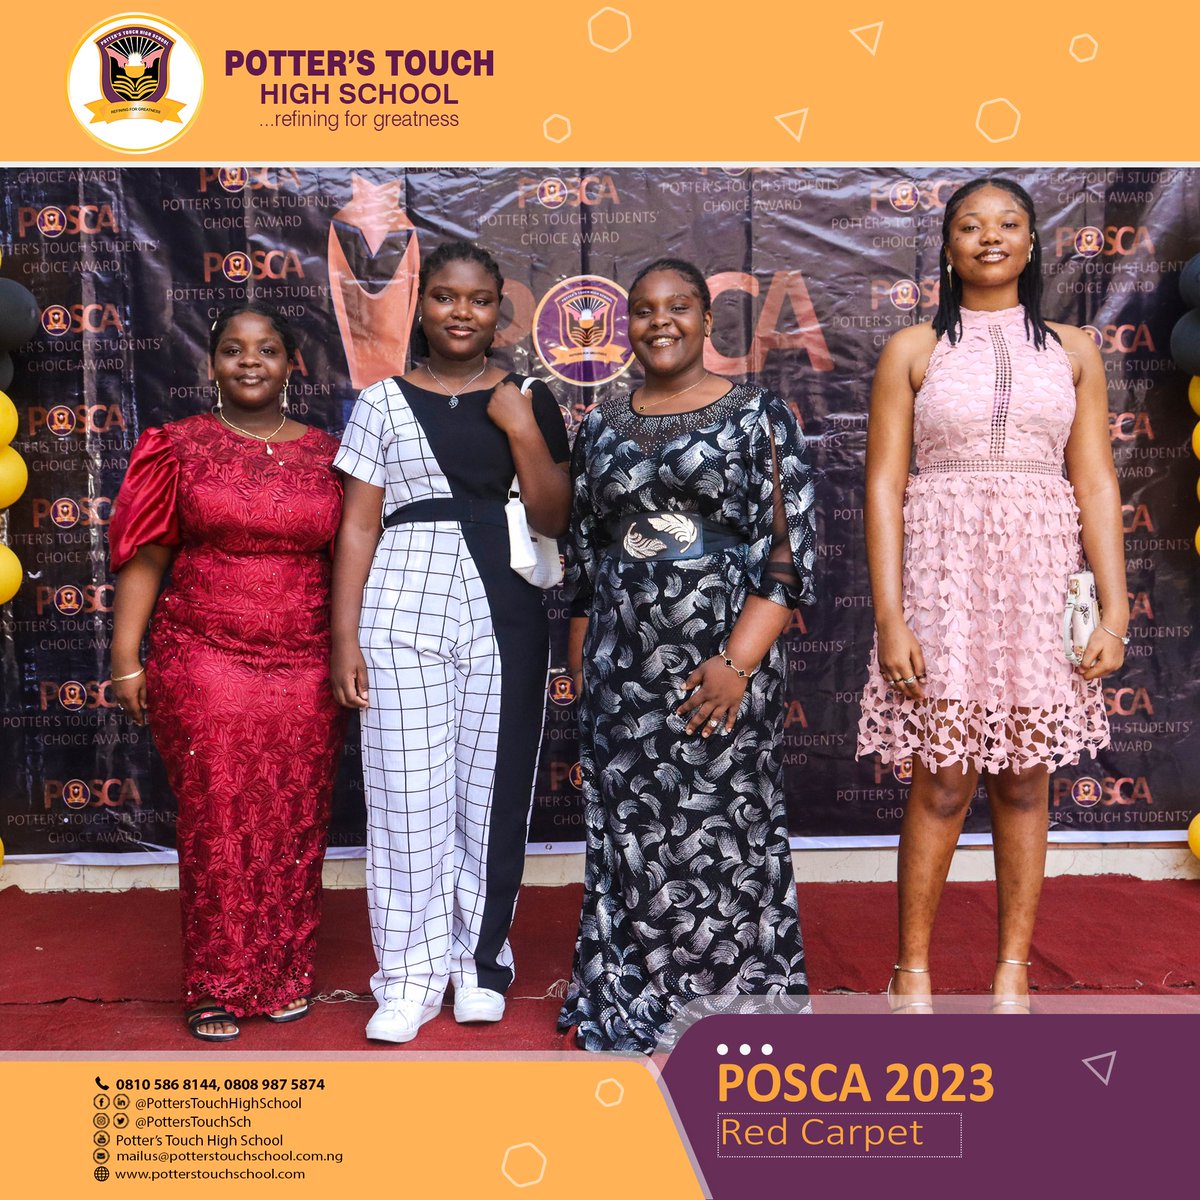 Potter's Touch Students' Choice Award Red Carpet Glam! ✨🌟The red carpet moment at the Potter's Touch Students' Choice Awards (POSCA) 2023 was nothing short of excellence and confidence! 🌠🔥 
#POSCA2023 #PottersTouch #EveryChildCanBeAStar #RefiningForGreatness #BestPlaceToLearn